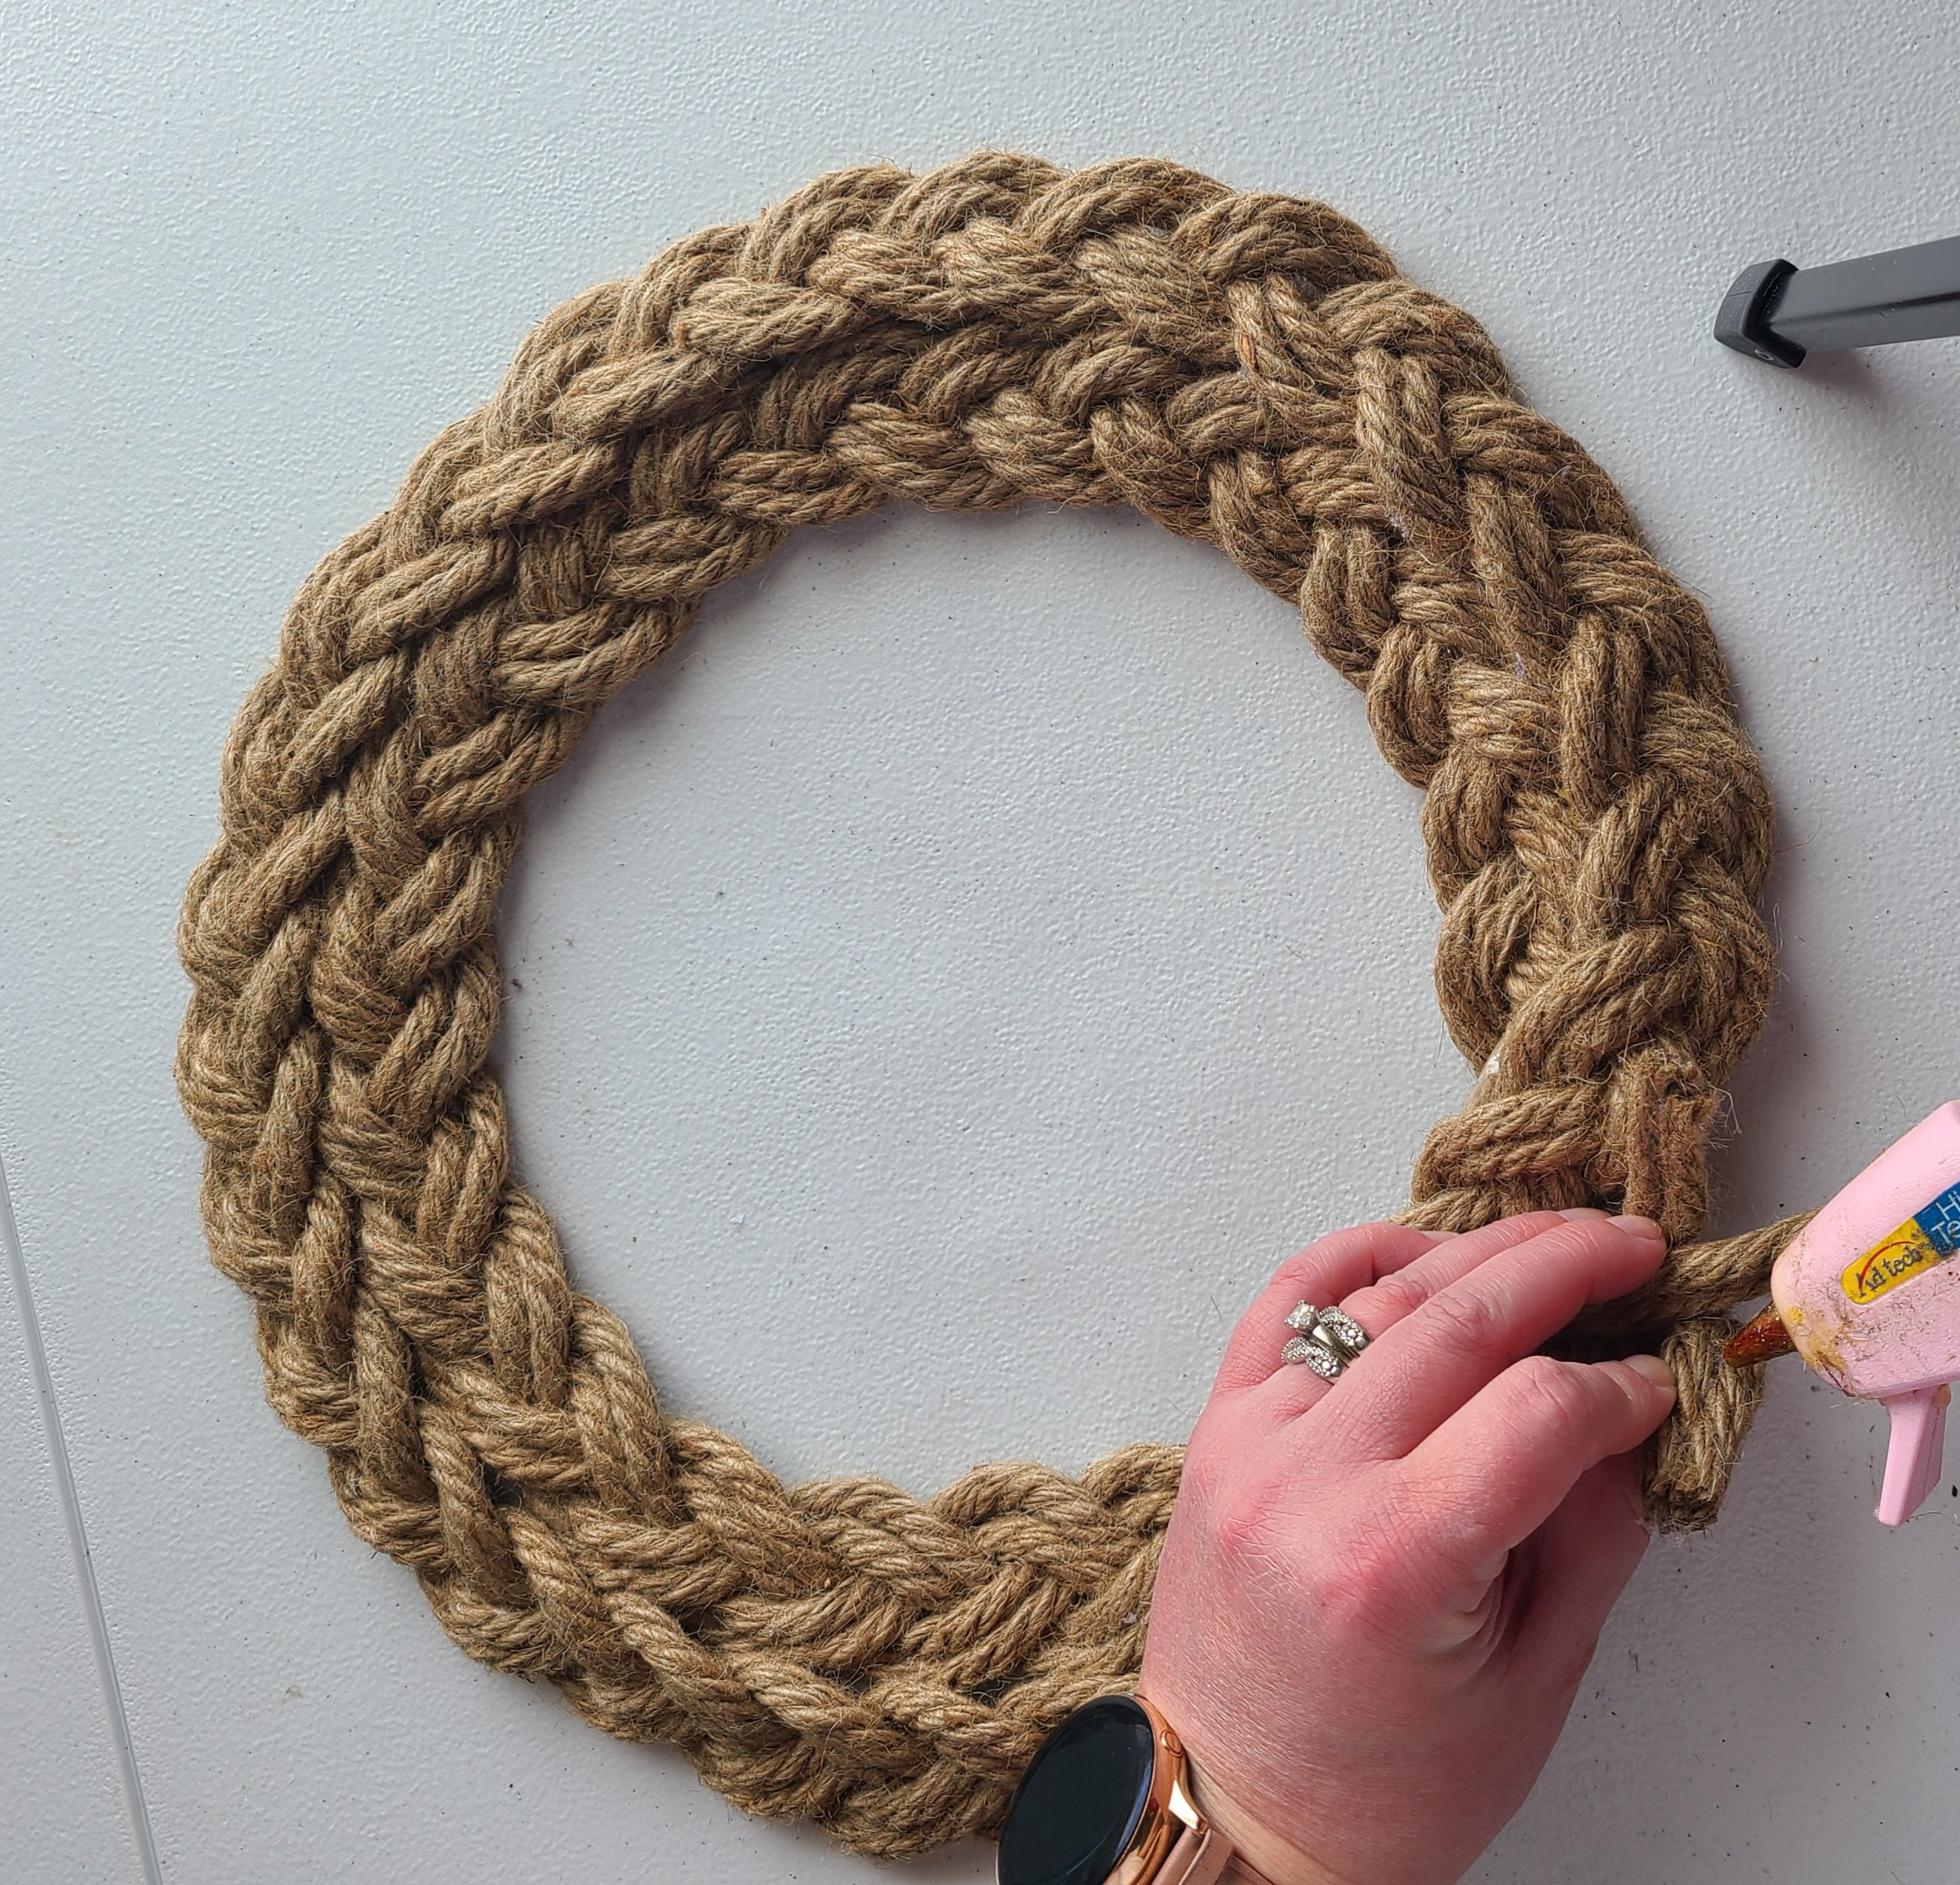 Putting hot glue on the end of the rope to attach it to the wreath.